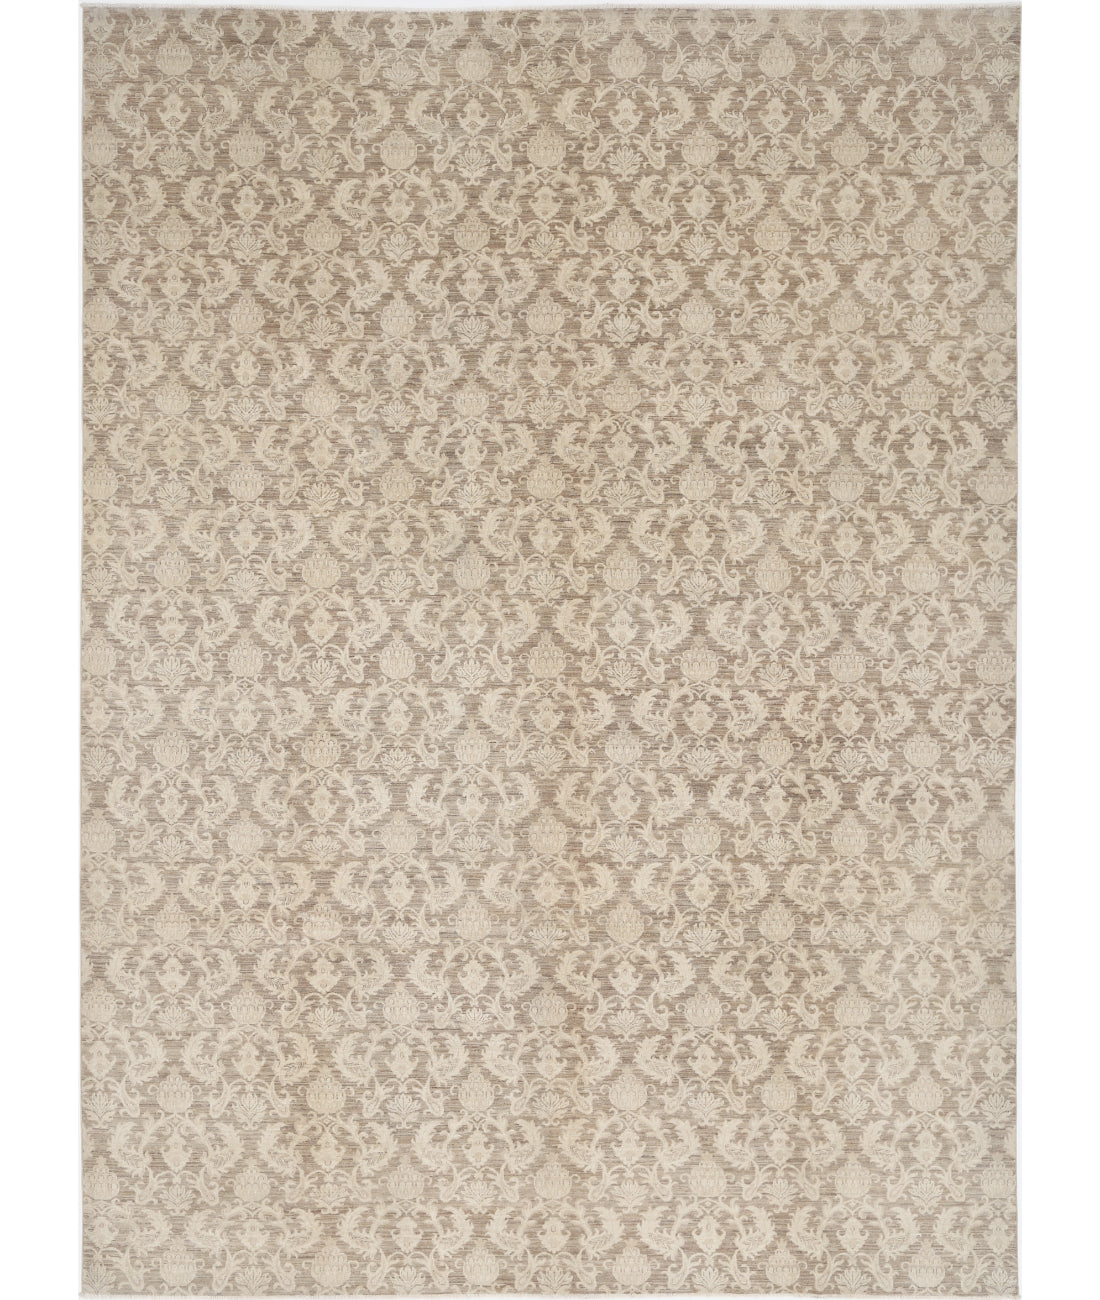 Hand Knotted Artemix Wool Rug - 10'7'' x 14'8'' 10'7'' x 14'8'' (318 X 440) / Brown / Ivory